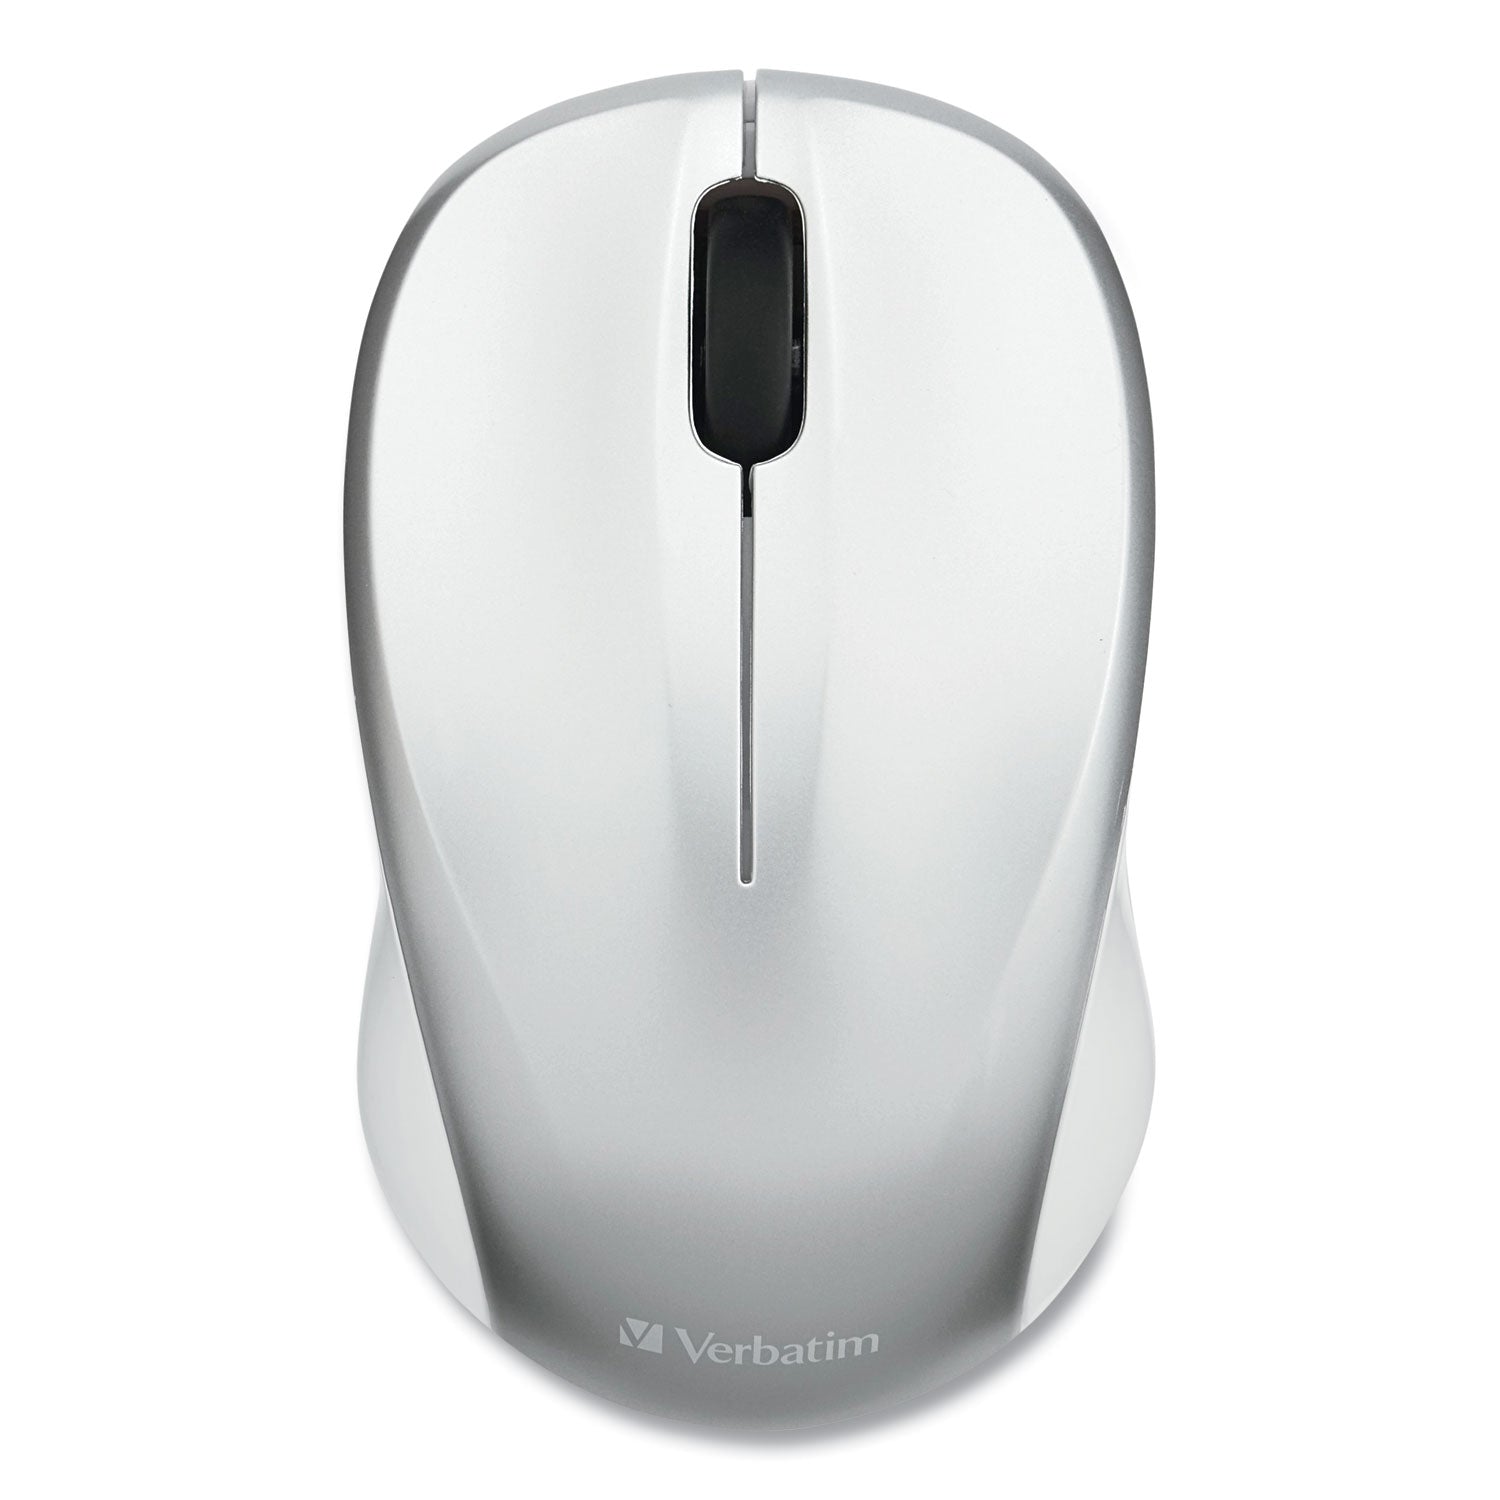 silent-wireless-blue-led-mouse-24-ghz-frequency-328-ft-wireless-range-left-right-hand-use-silver_ver99777 - 3